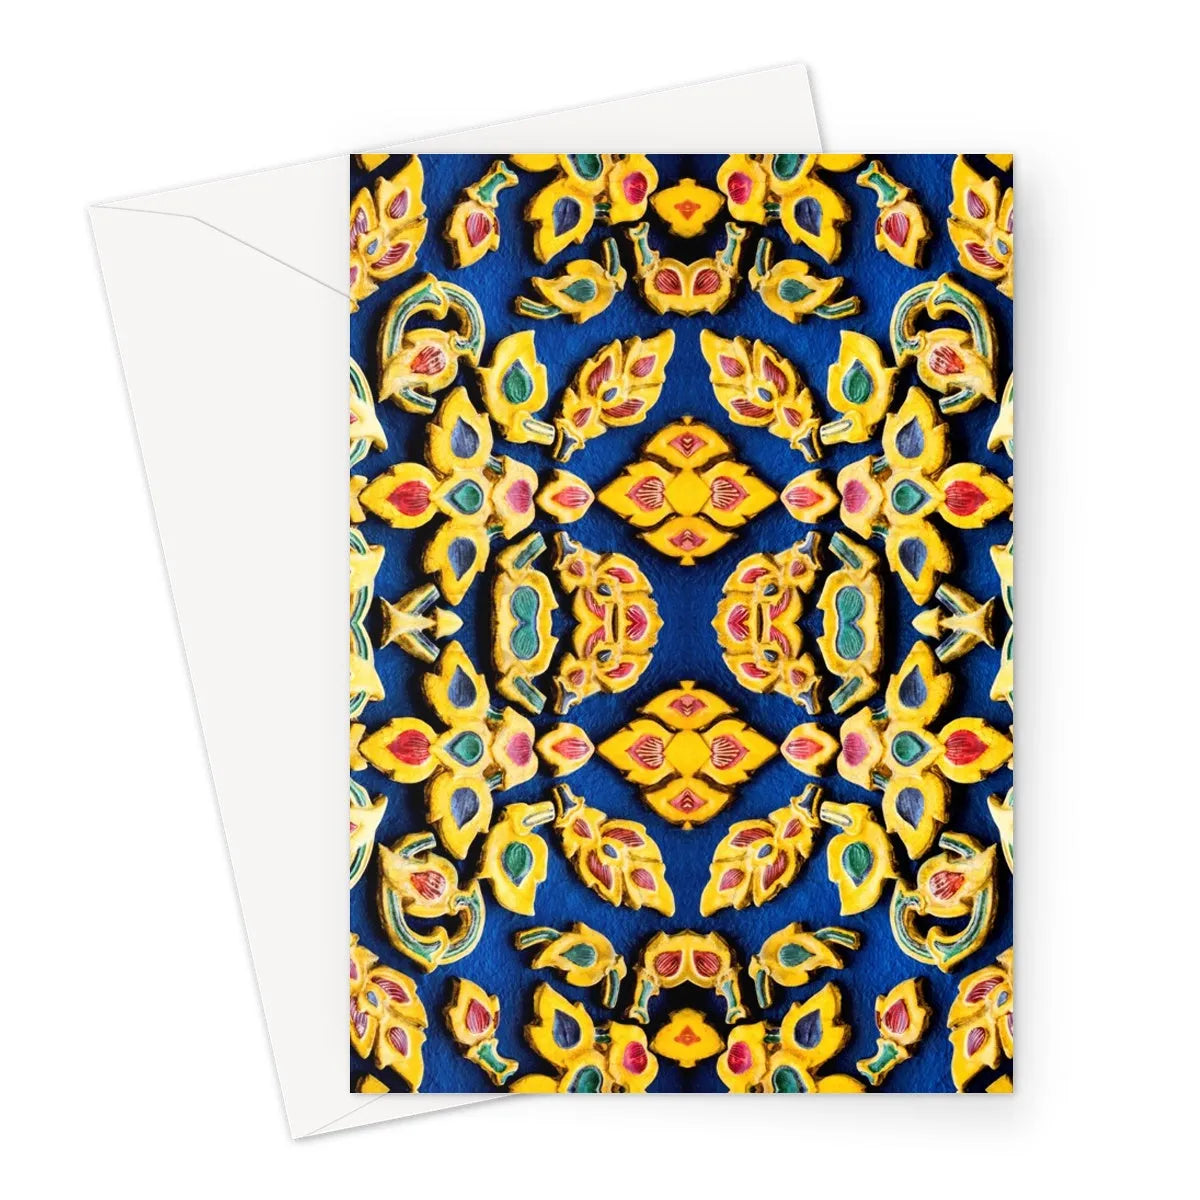 Ayodhya Greeting Card - A5 Portrait / 1 Card - Notebooks & Notepads - Aesthetic Art